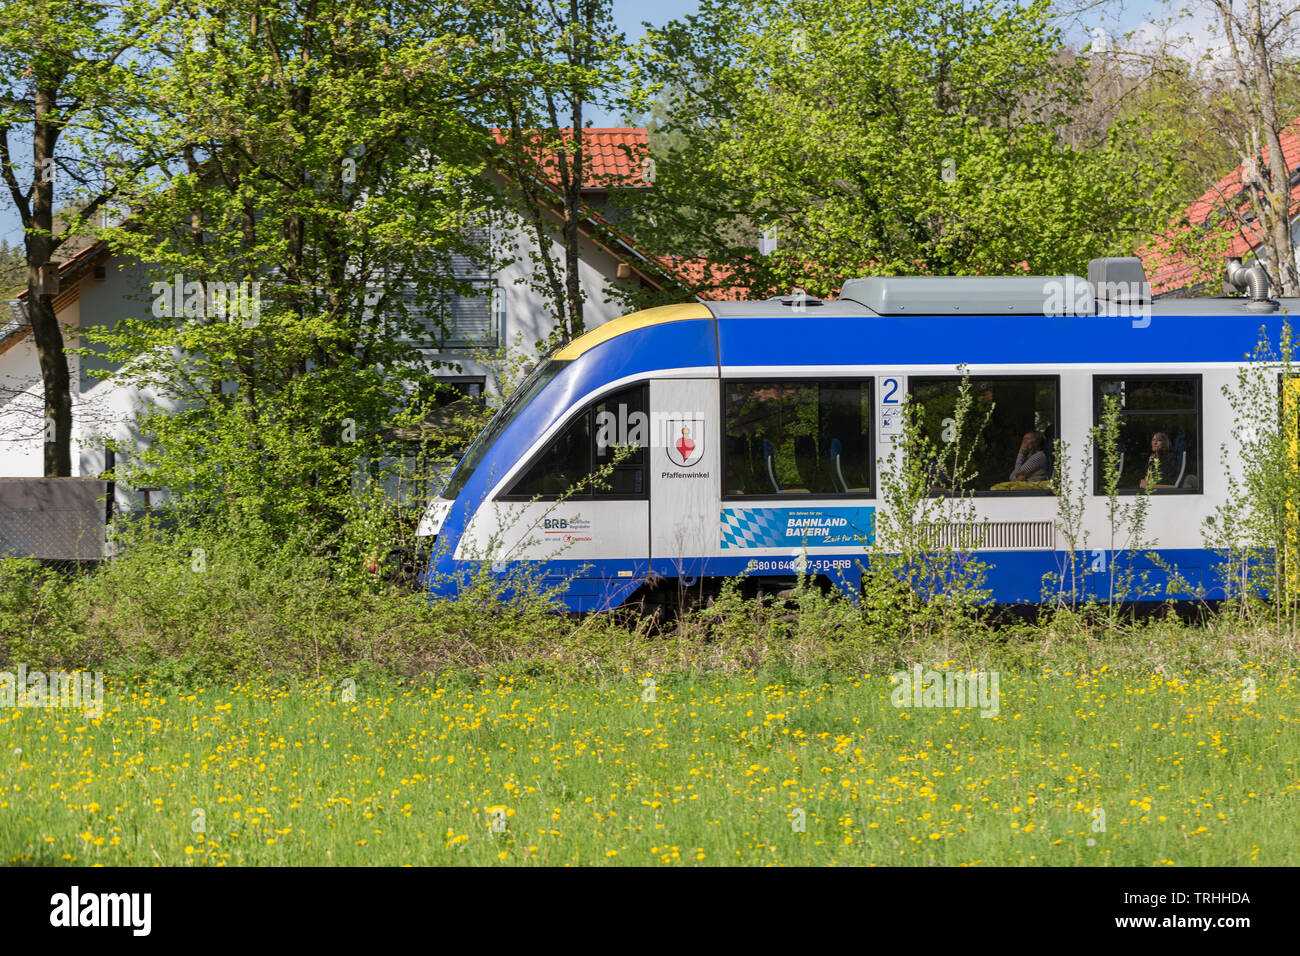 Train with the name 'Pfaffenwinkel' moving through the town of Utting. The train - a LINT 41 manufactured by Alstom - belongs to Bayerische Regiobahn. Stock Photo